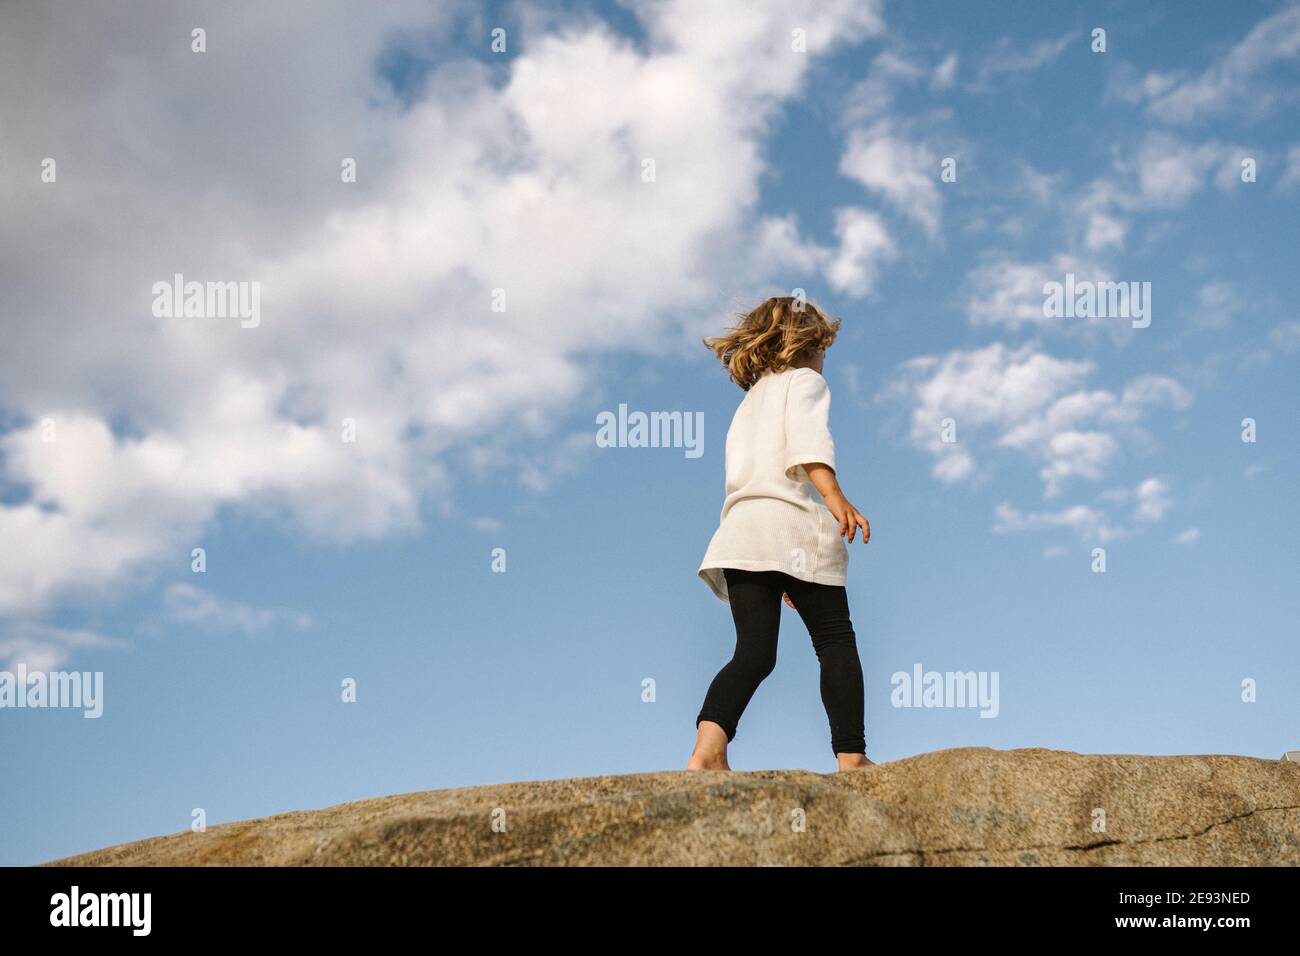 Low angle view of girl walking on rocks Stock Photo